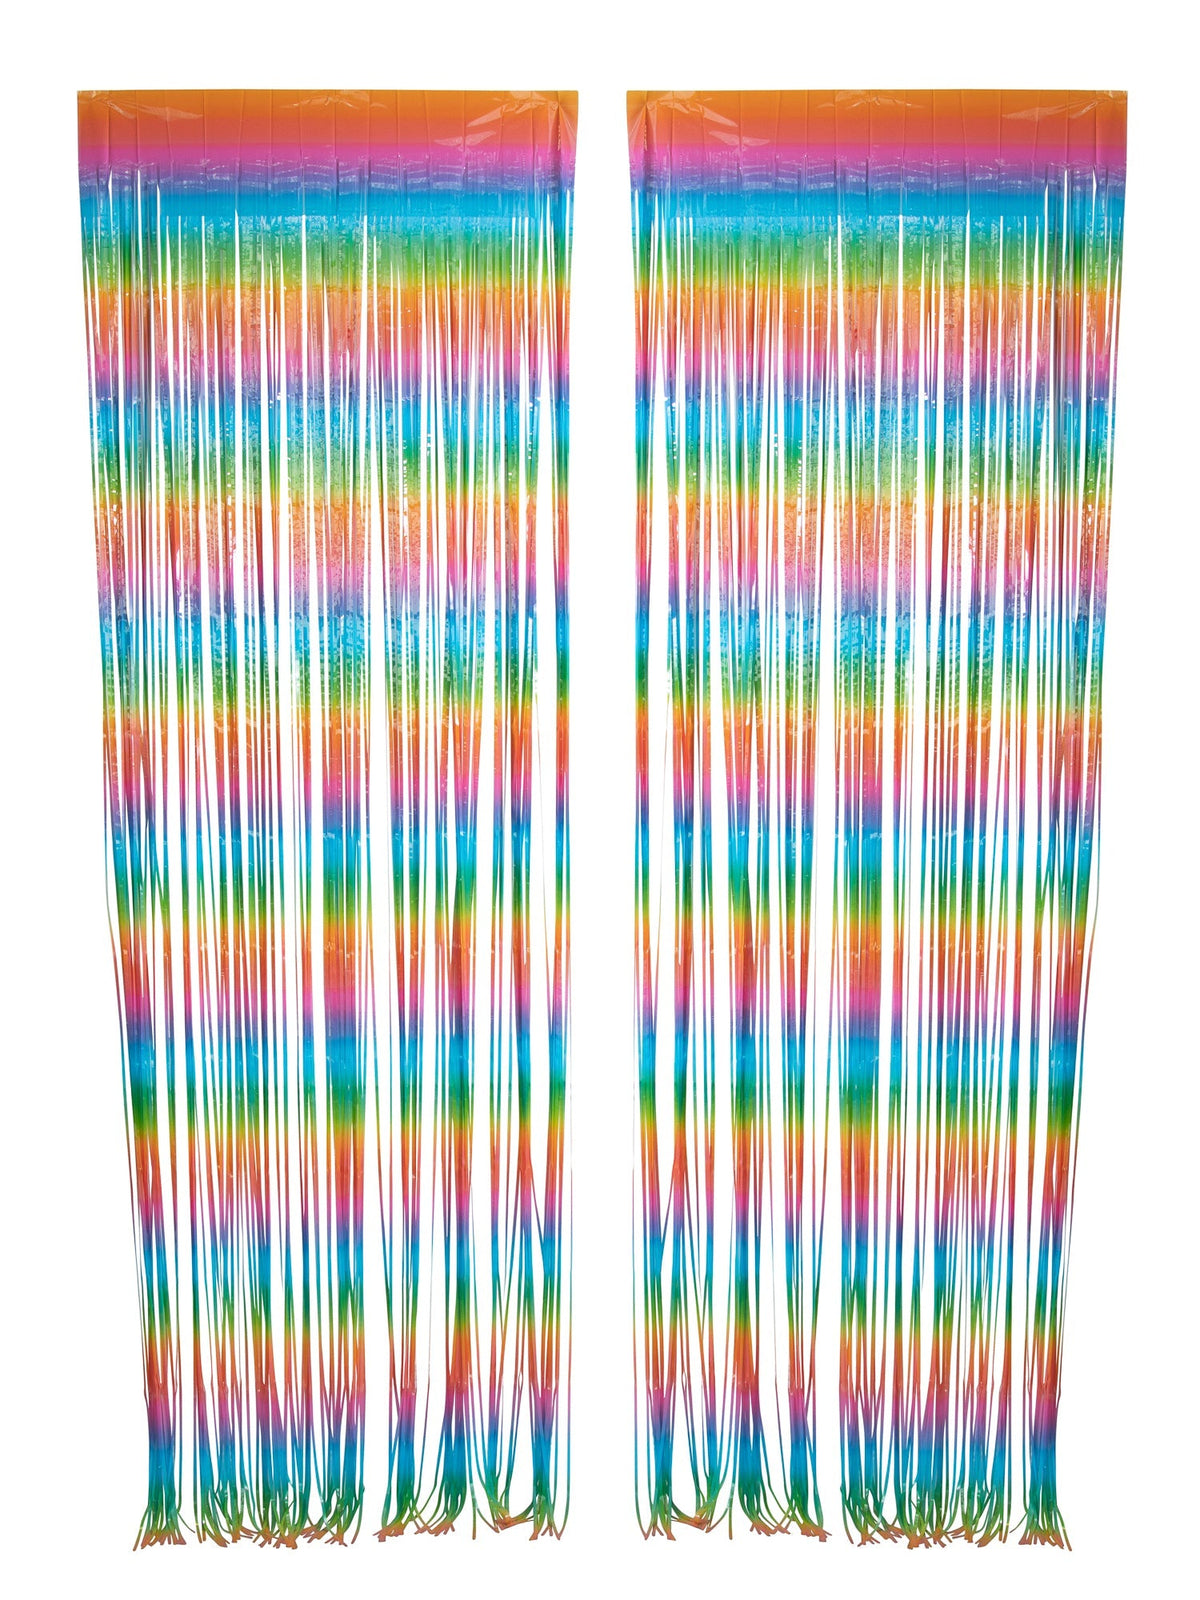 WIDE OCEAN INTERNATIONAL TRADE BEIJING CO., LTD Decorations Rainbow, Macaroon Collection, Foil Fringe Curtain, 2 Count 810077650141